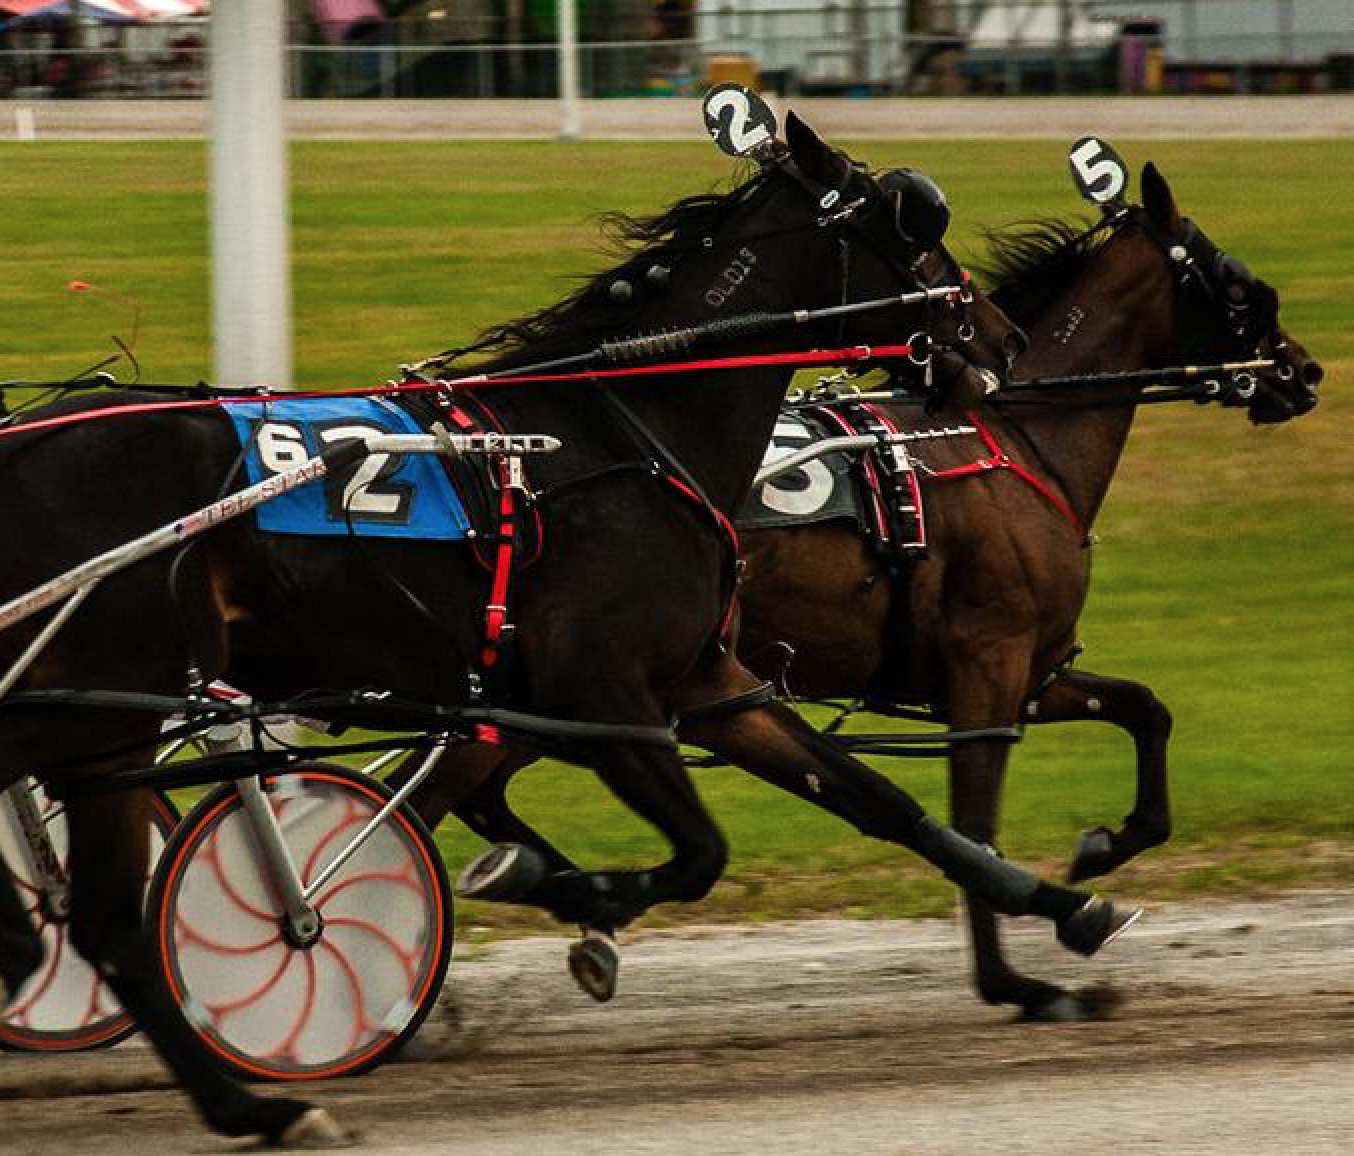 Standardbred horses pull a cart as they race around the track.